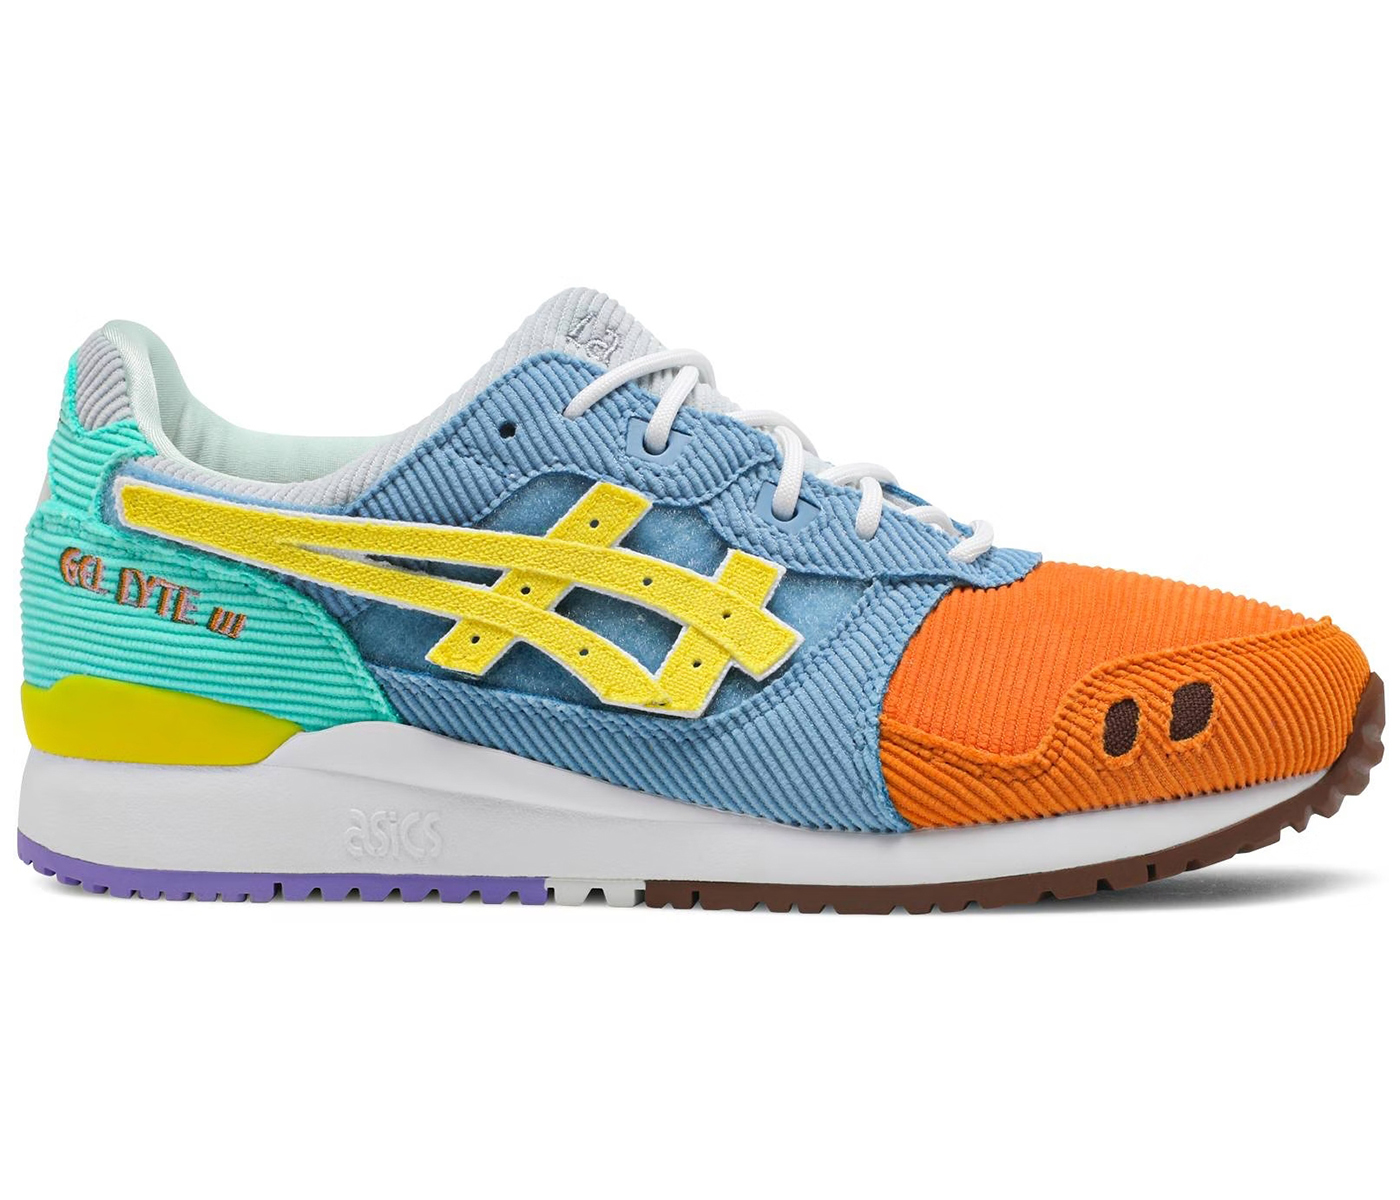 ASICS Gel-Lyte III Sean Wotherspoon x atmos Men's - 1203A019-000 - US